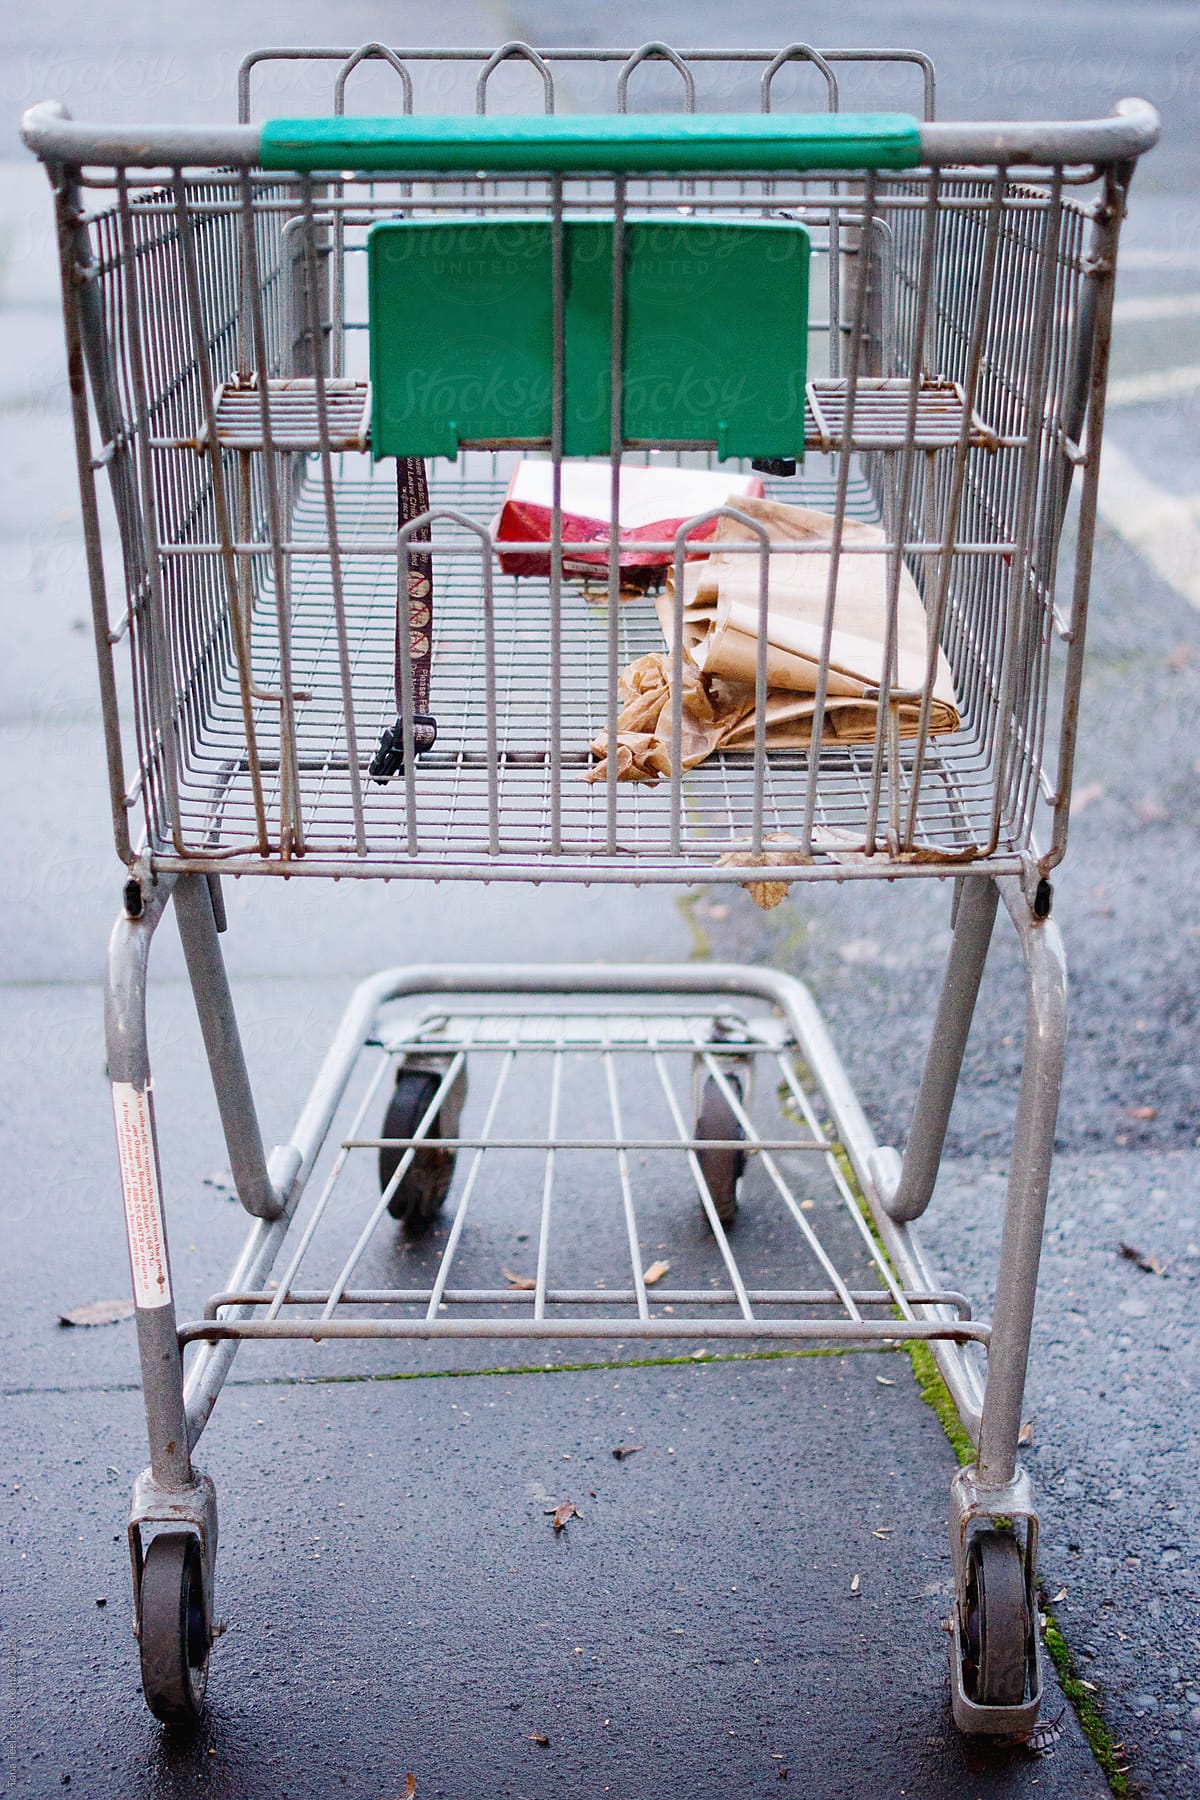 Abandoned shopping cart with litter left in it